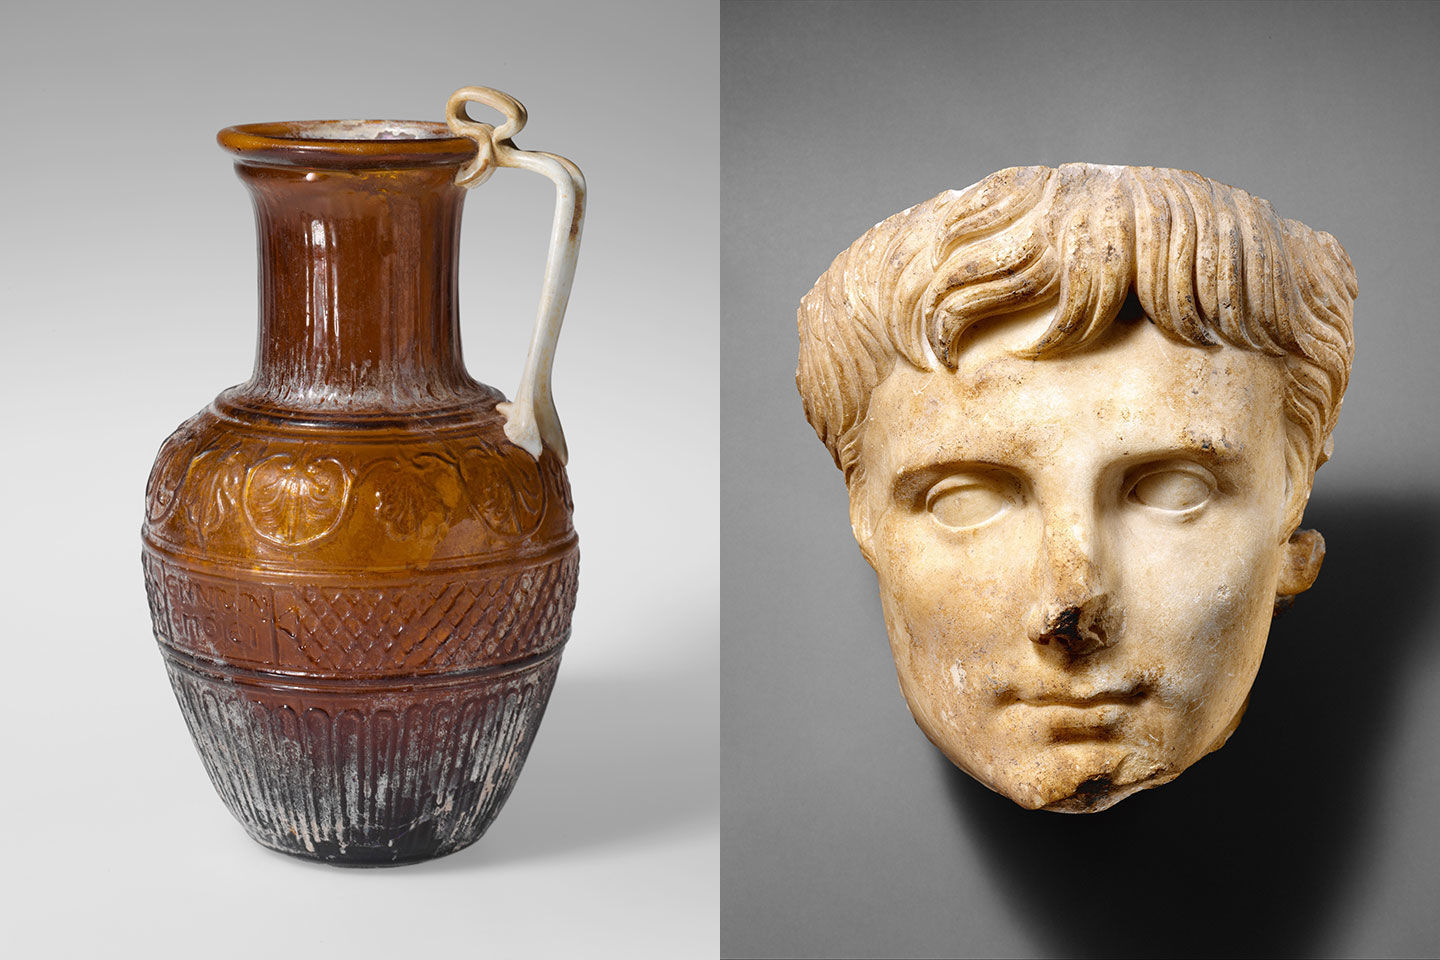 A brown glass jug and marble portrait of Emperor Augustus from ancient Rome